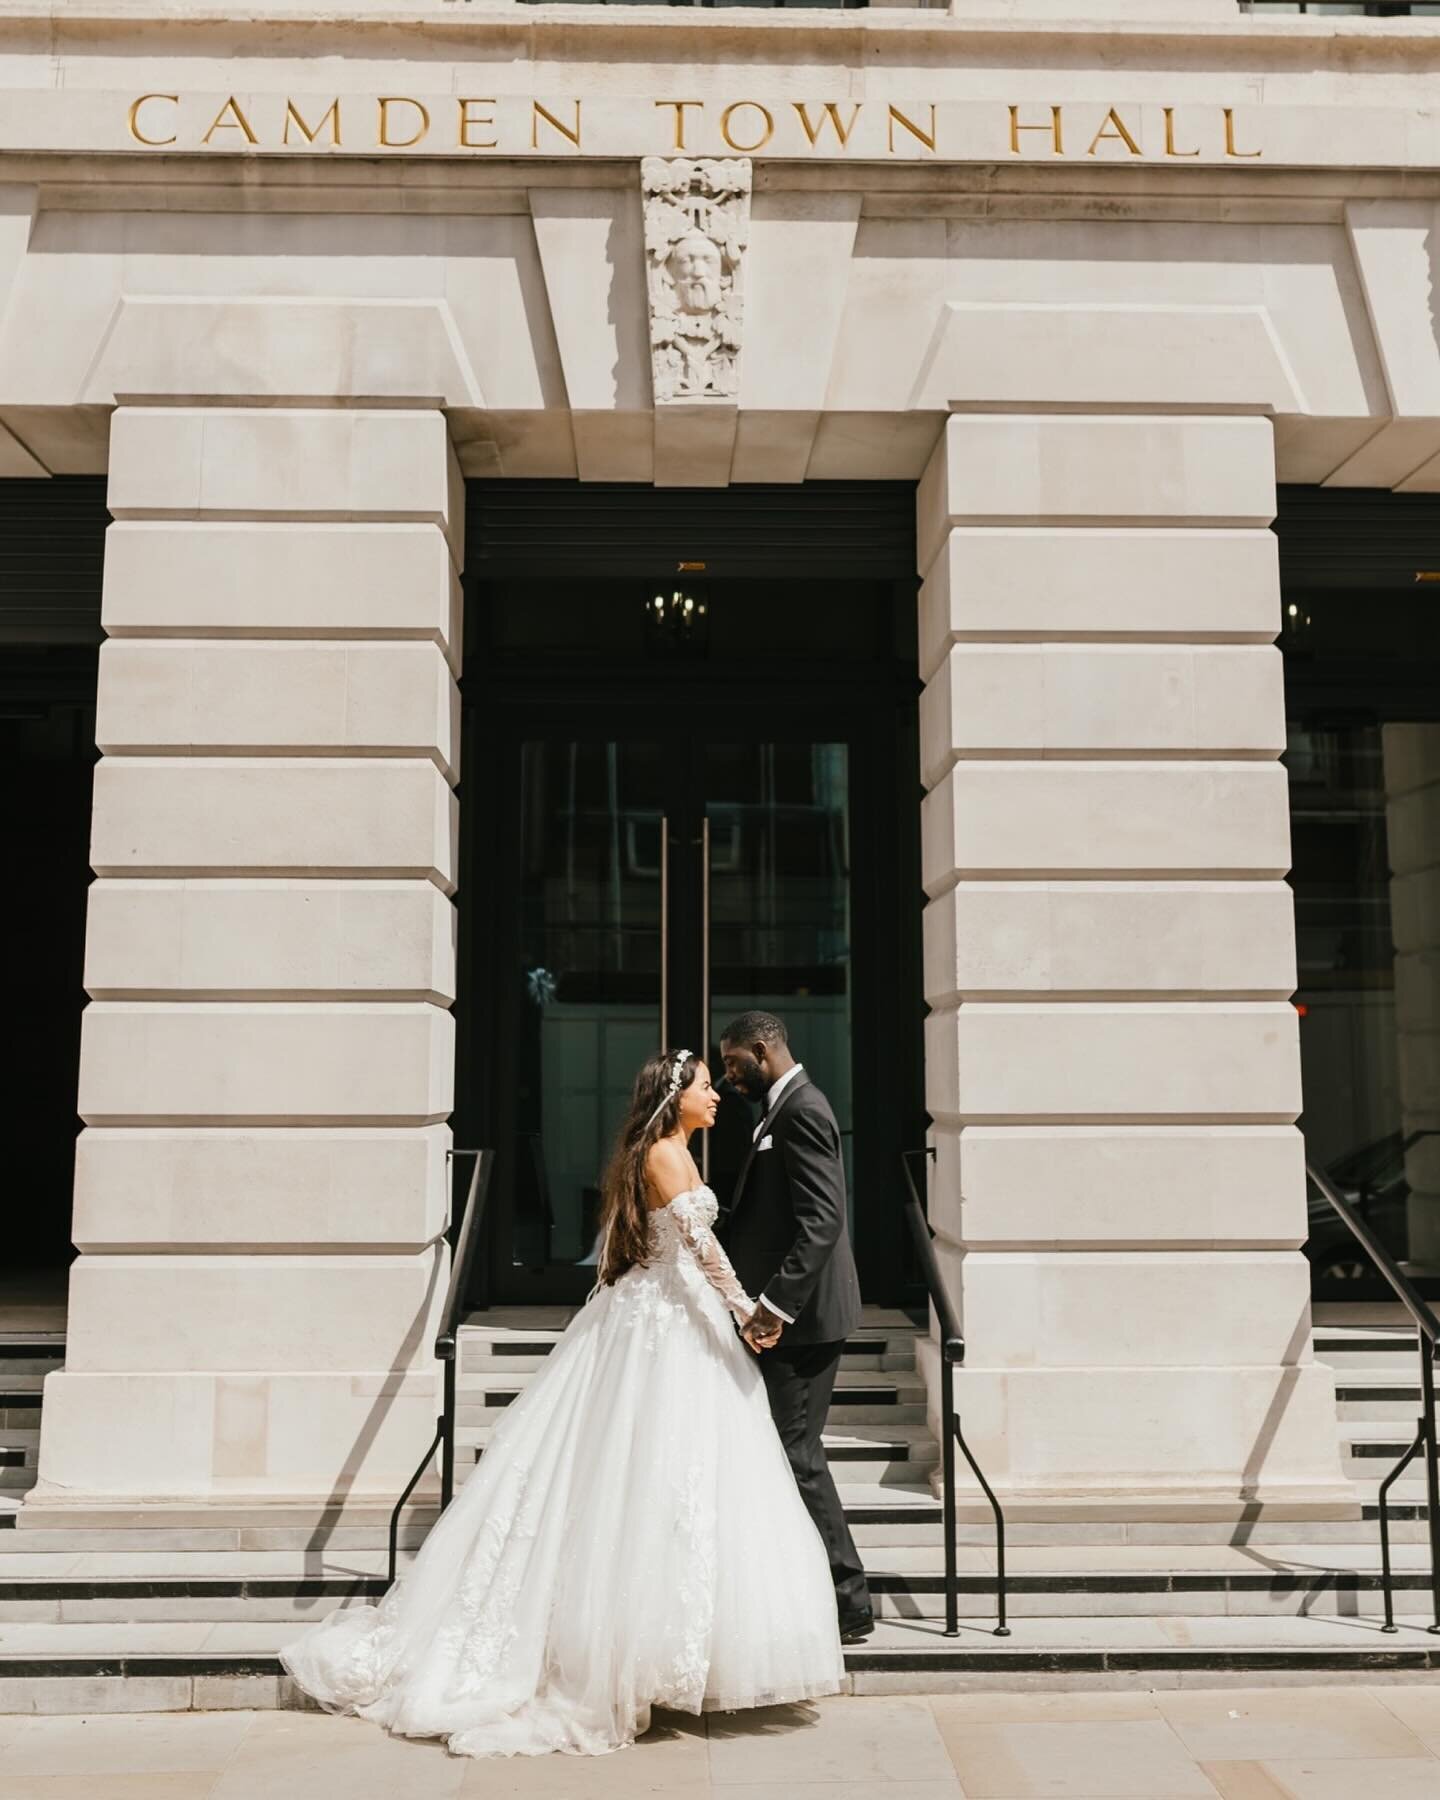 Hey there! I have some exciting news to share with you. Anna and Papa just had a small registry ceremony at the Camden Town Hall, and it was such a beautiful and intimate affair. They even had a separate party to celebrate their union, which was amaz